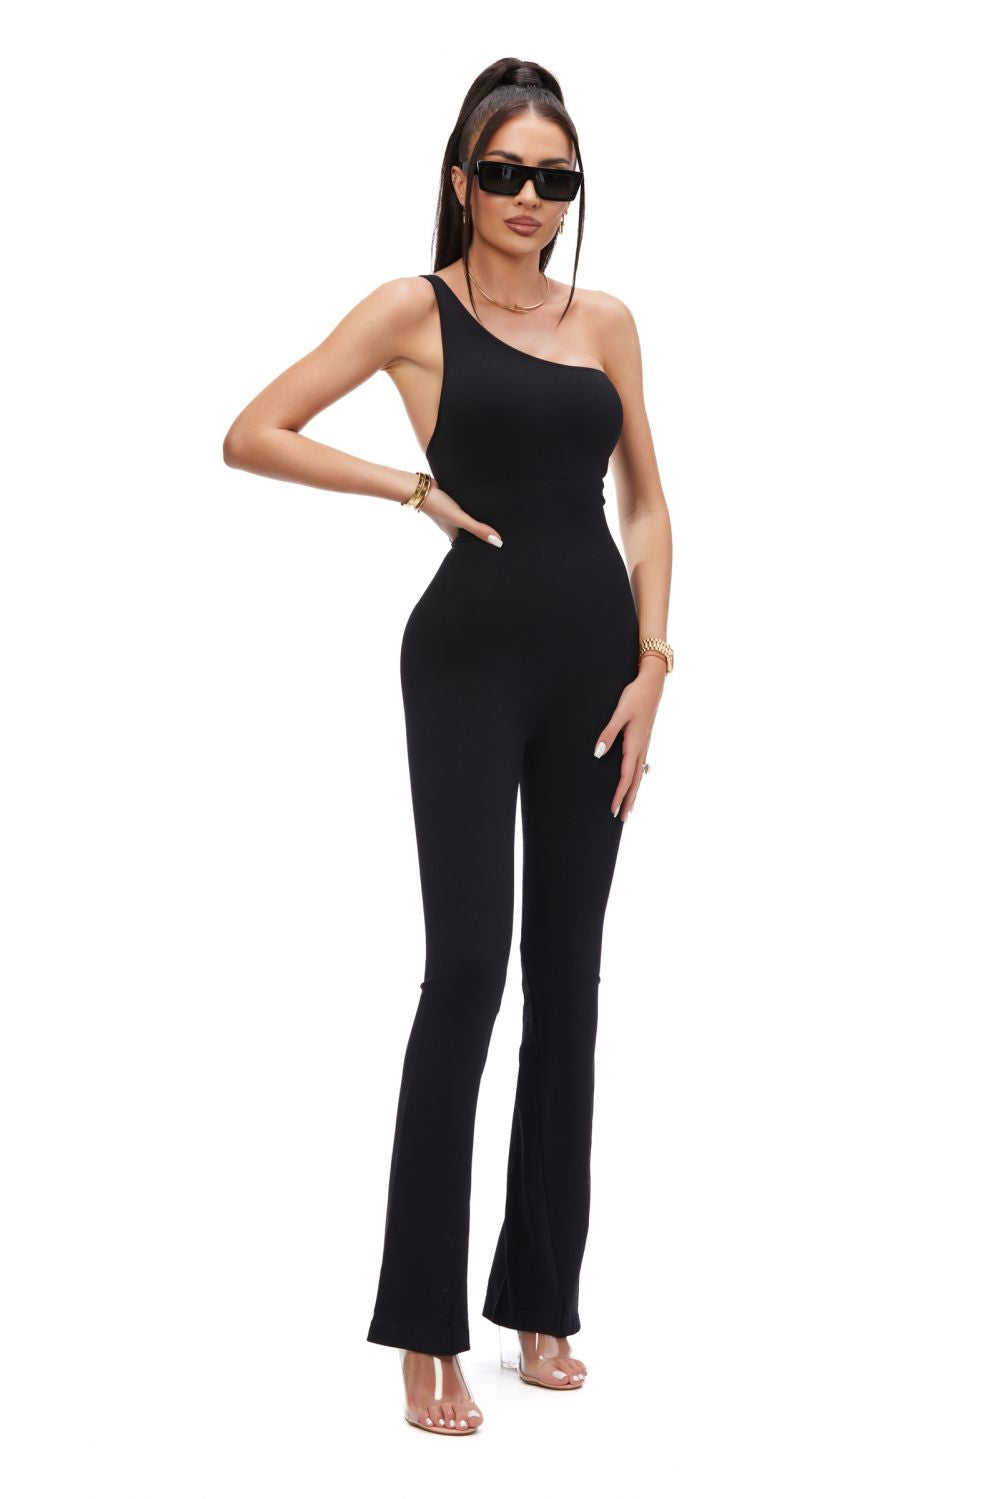 Ladies casual black modeling overalls Mimoza Bogas